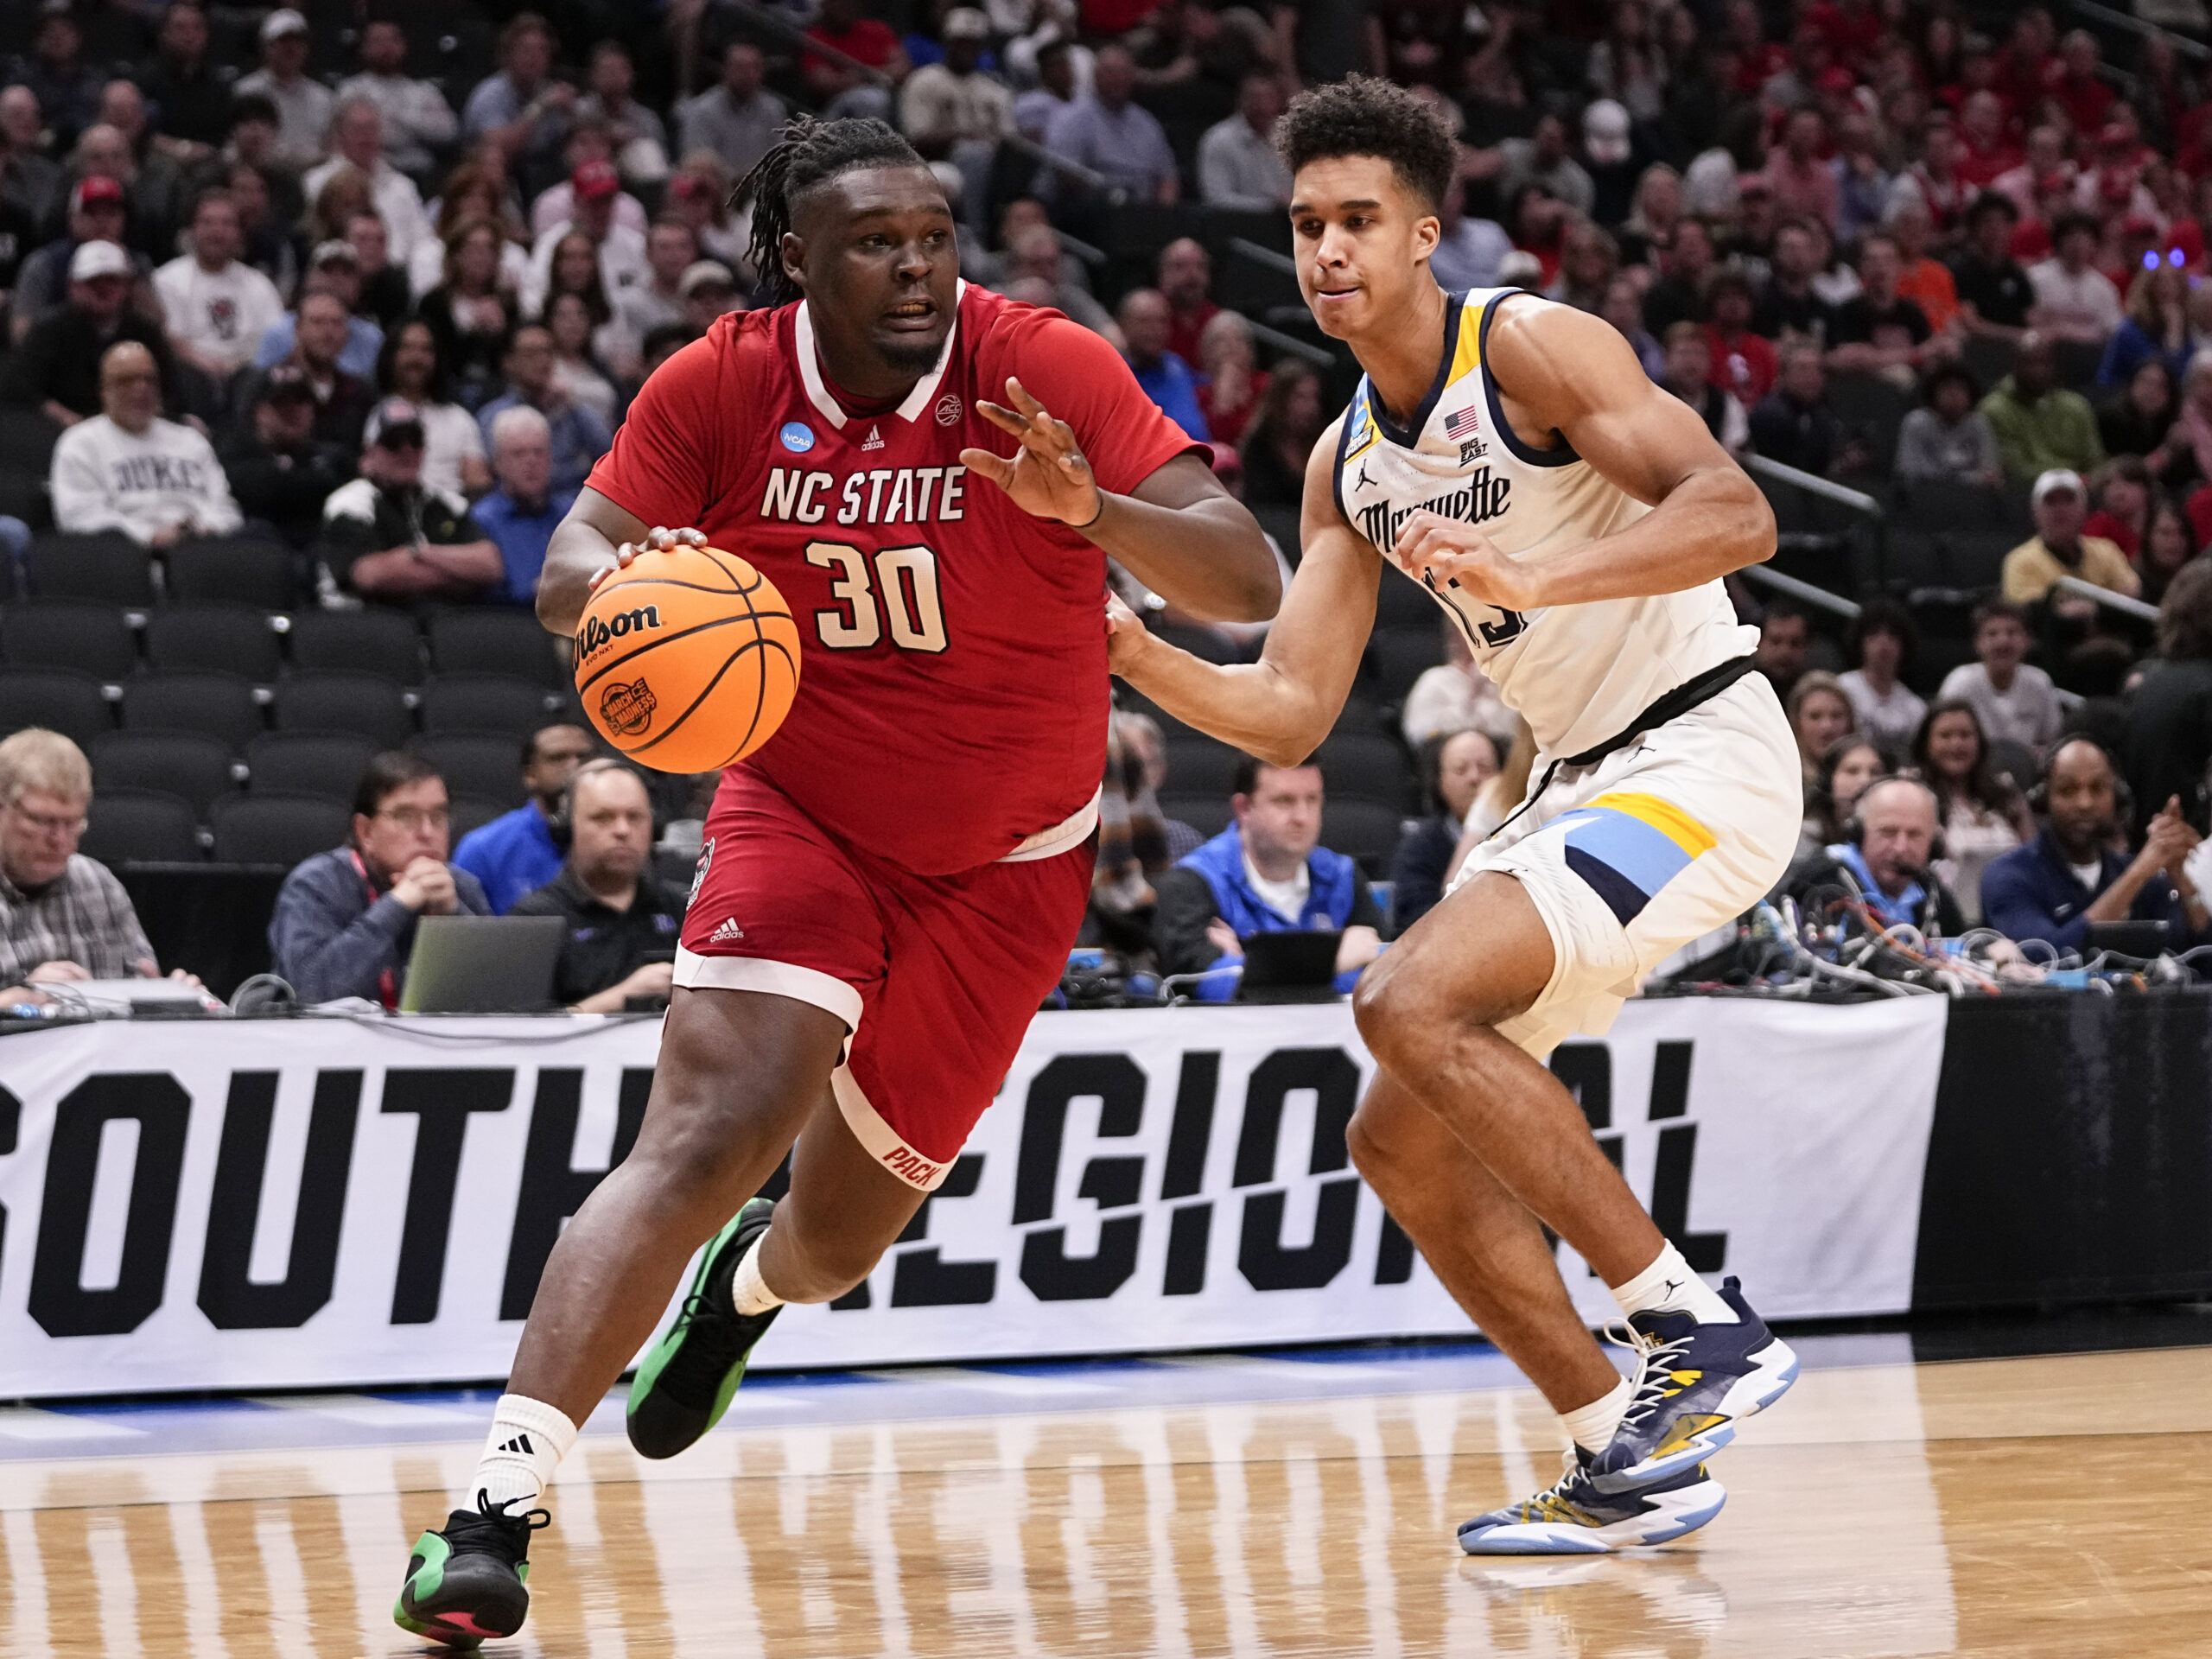 N.C. State, March Madness’ biggest underdog, advances to the Elite Eight